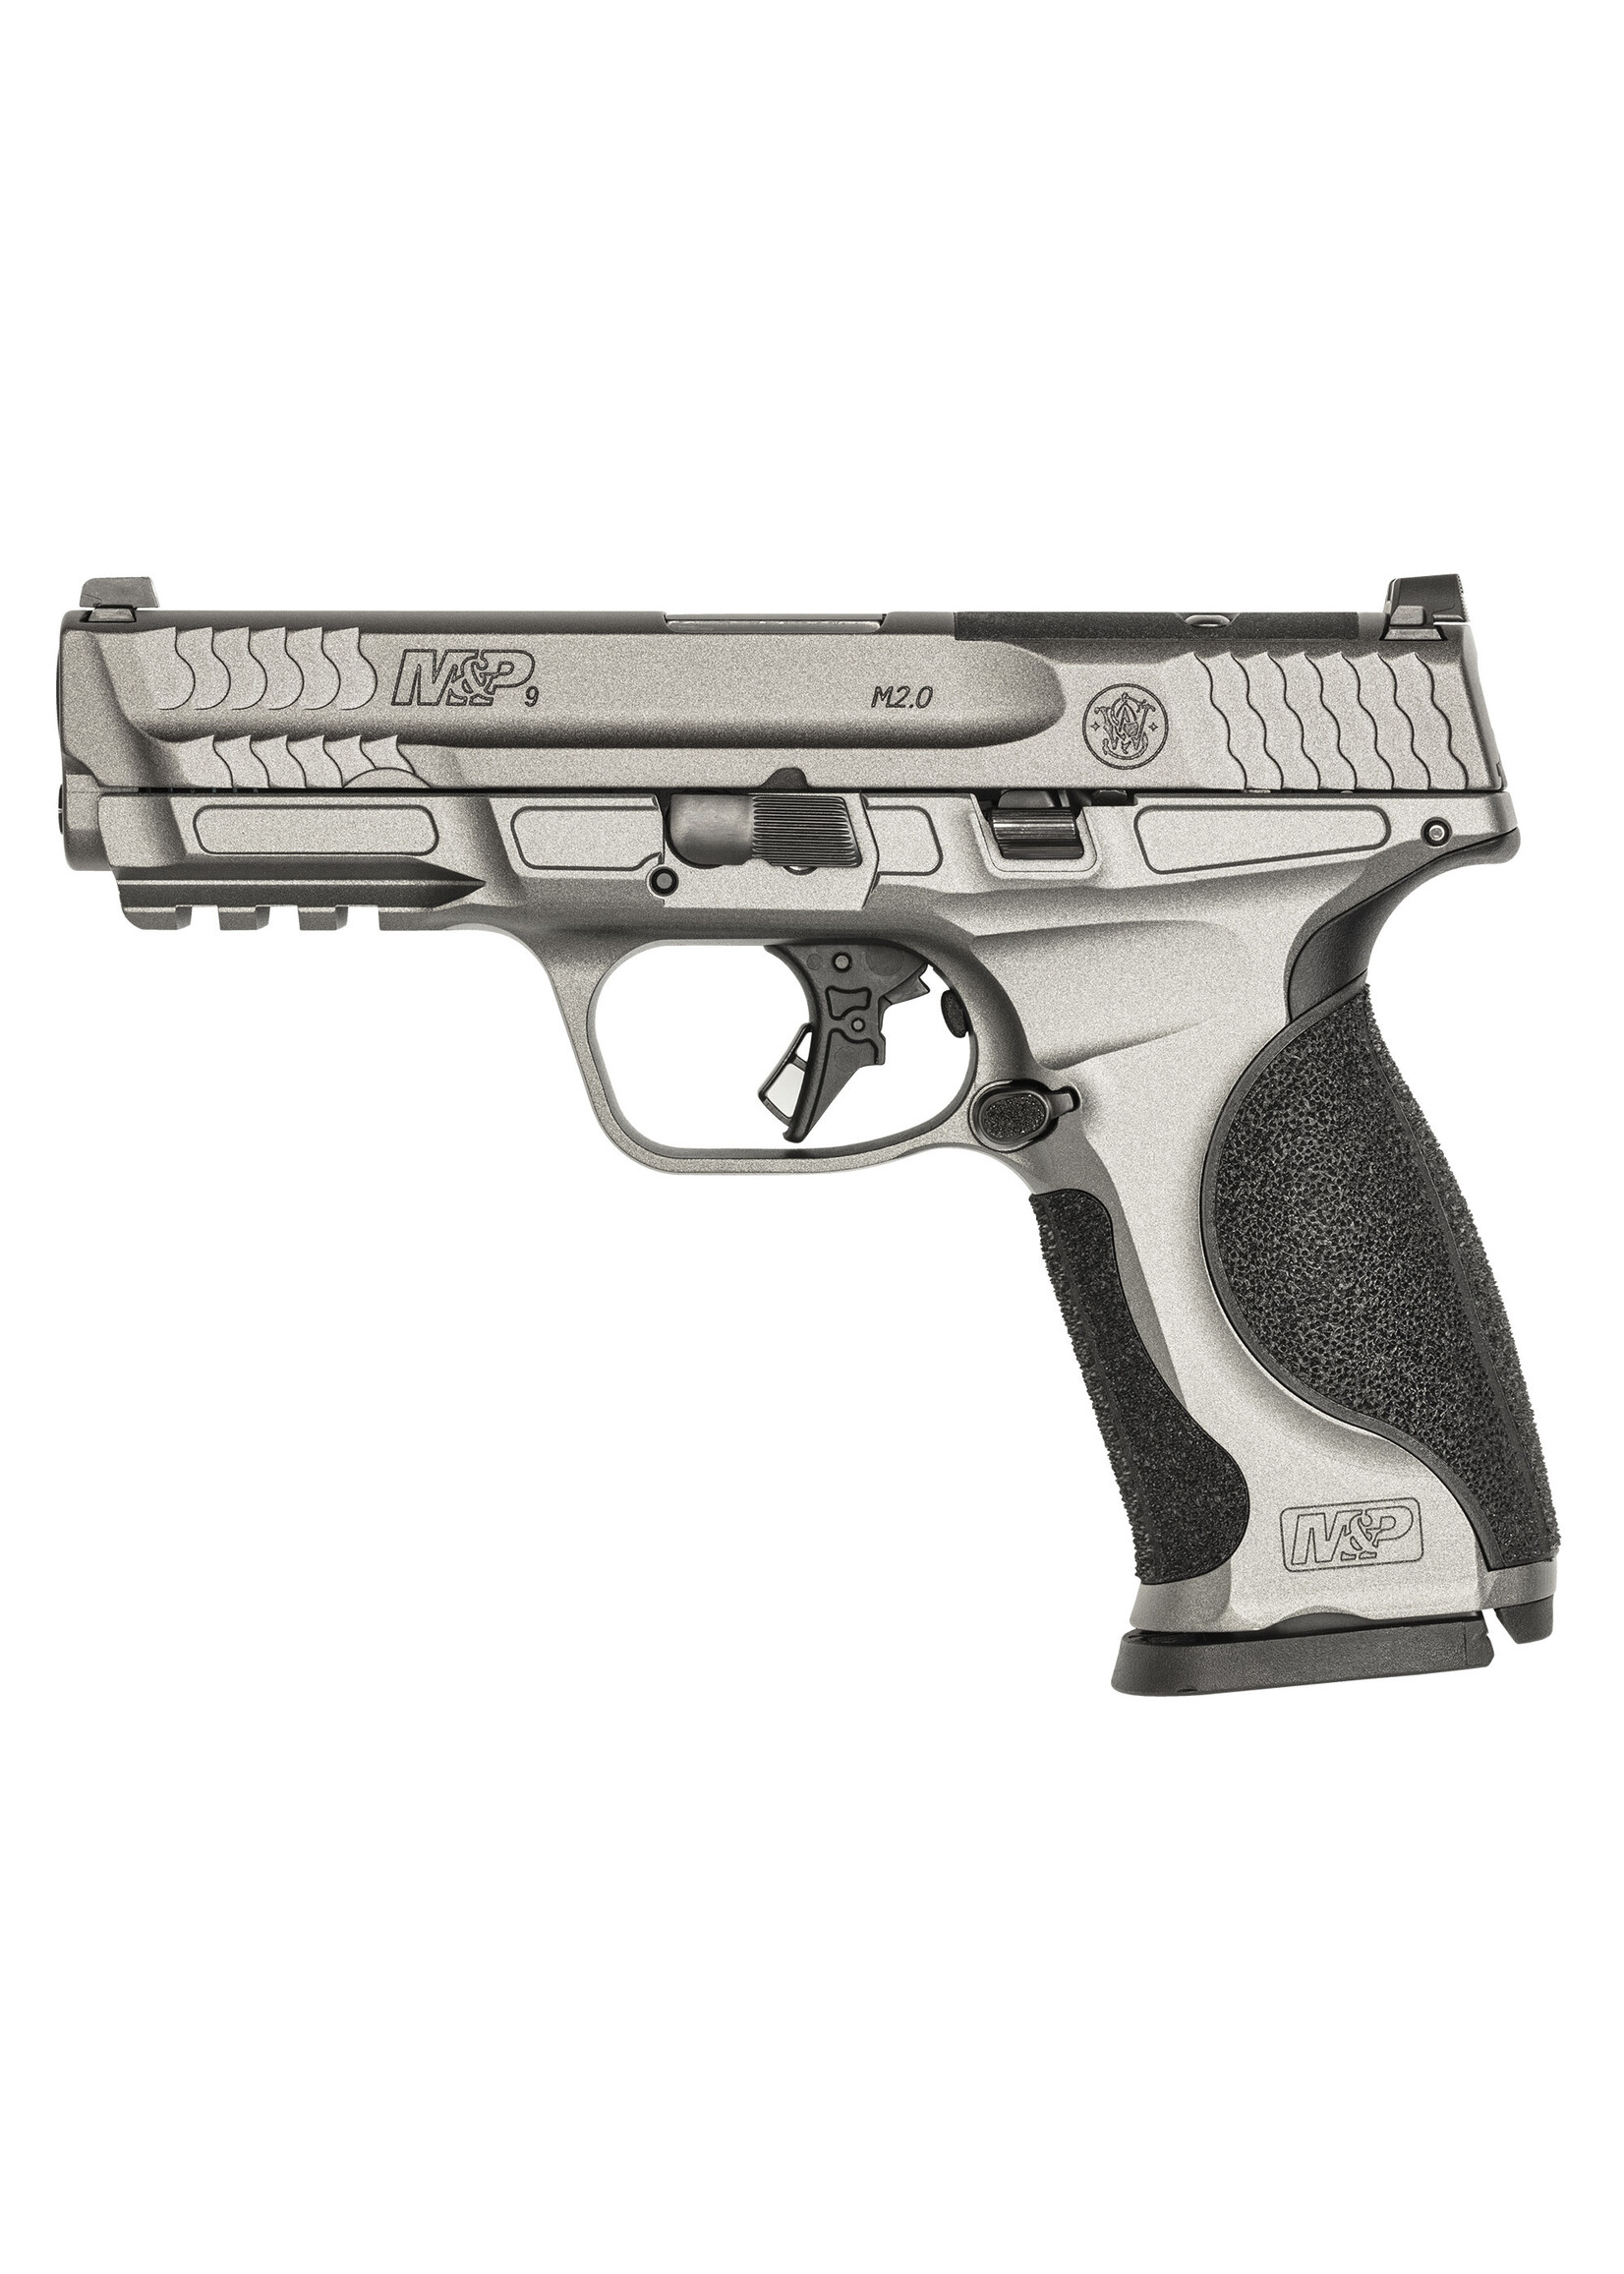 SMITH & WESSON SMITH & WESSON M&P9 M2.0 METAL 9MM 17RD 4.25"